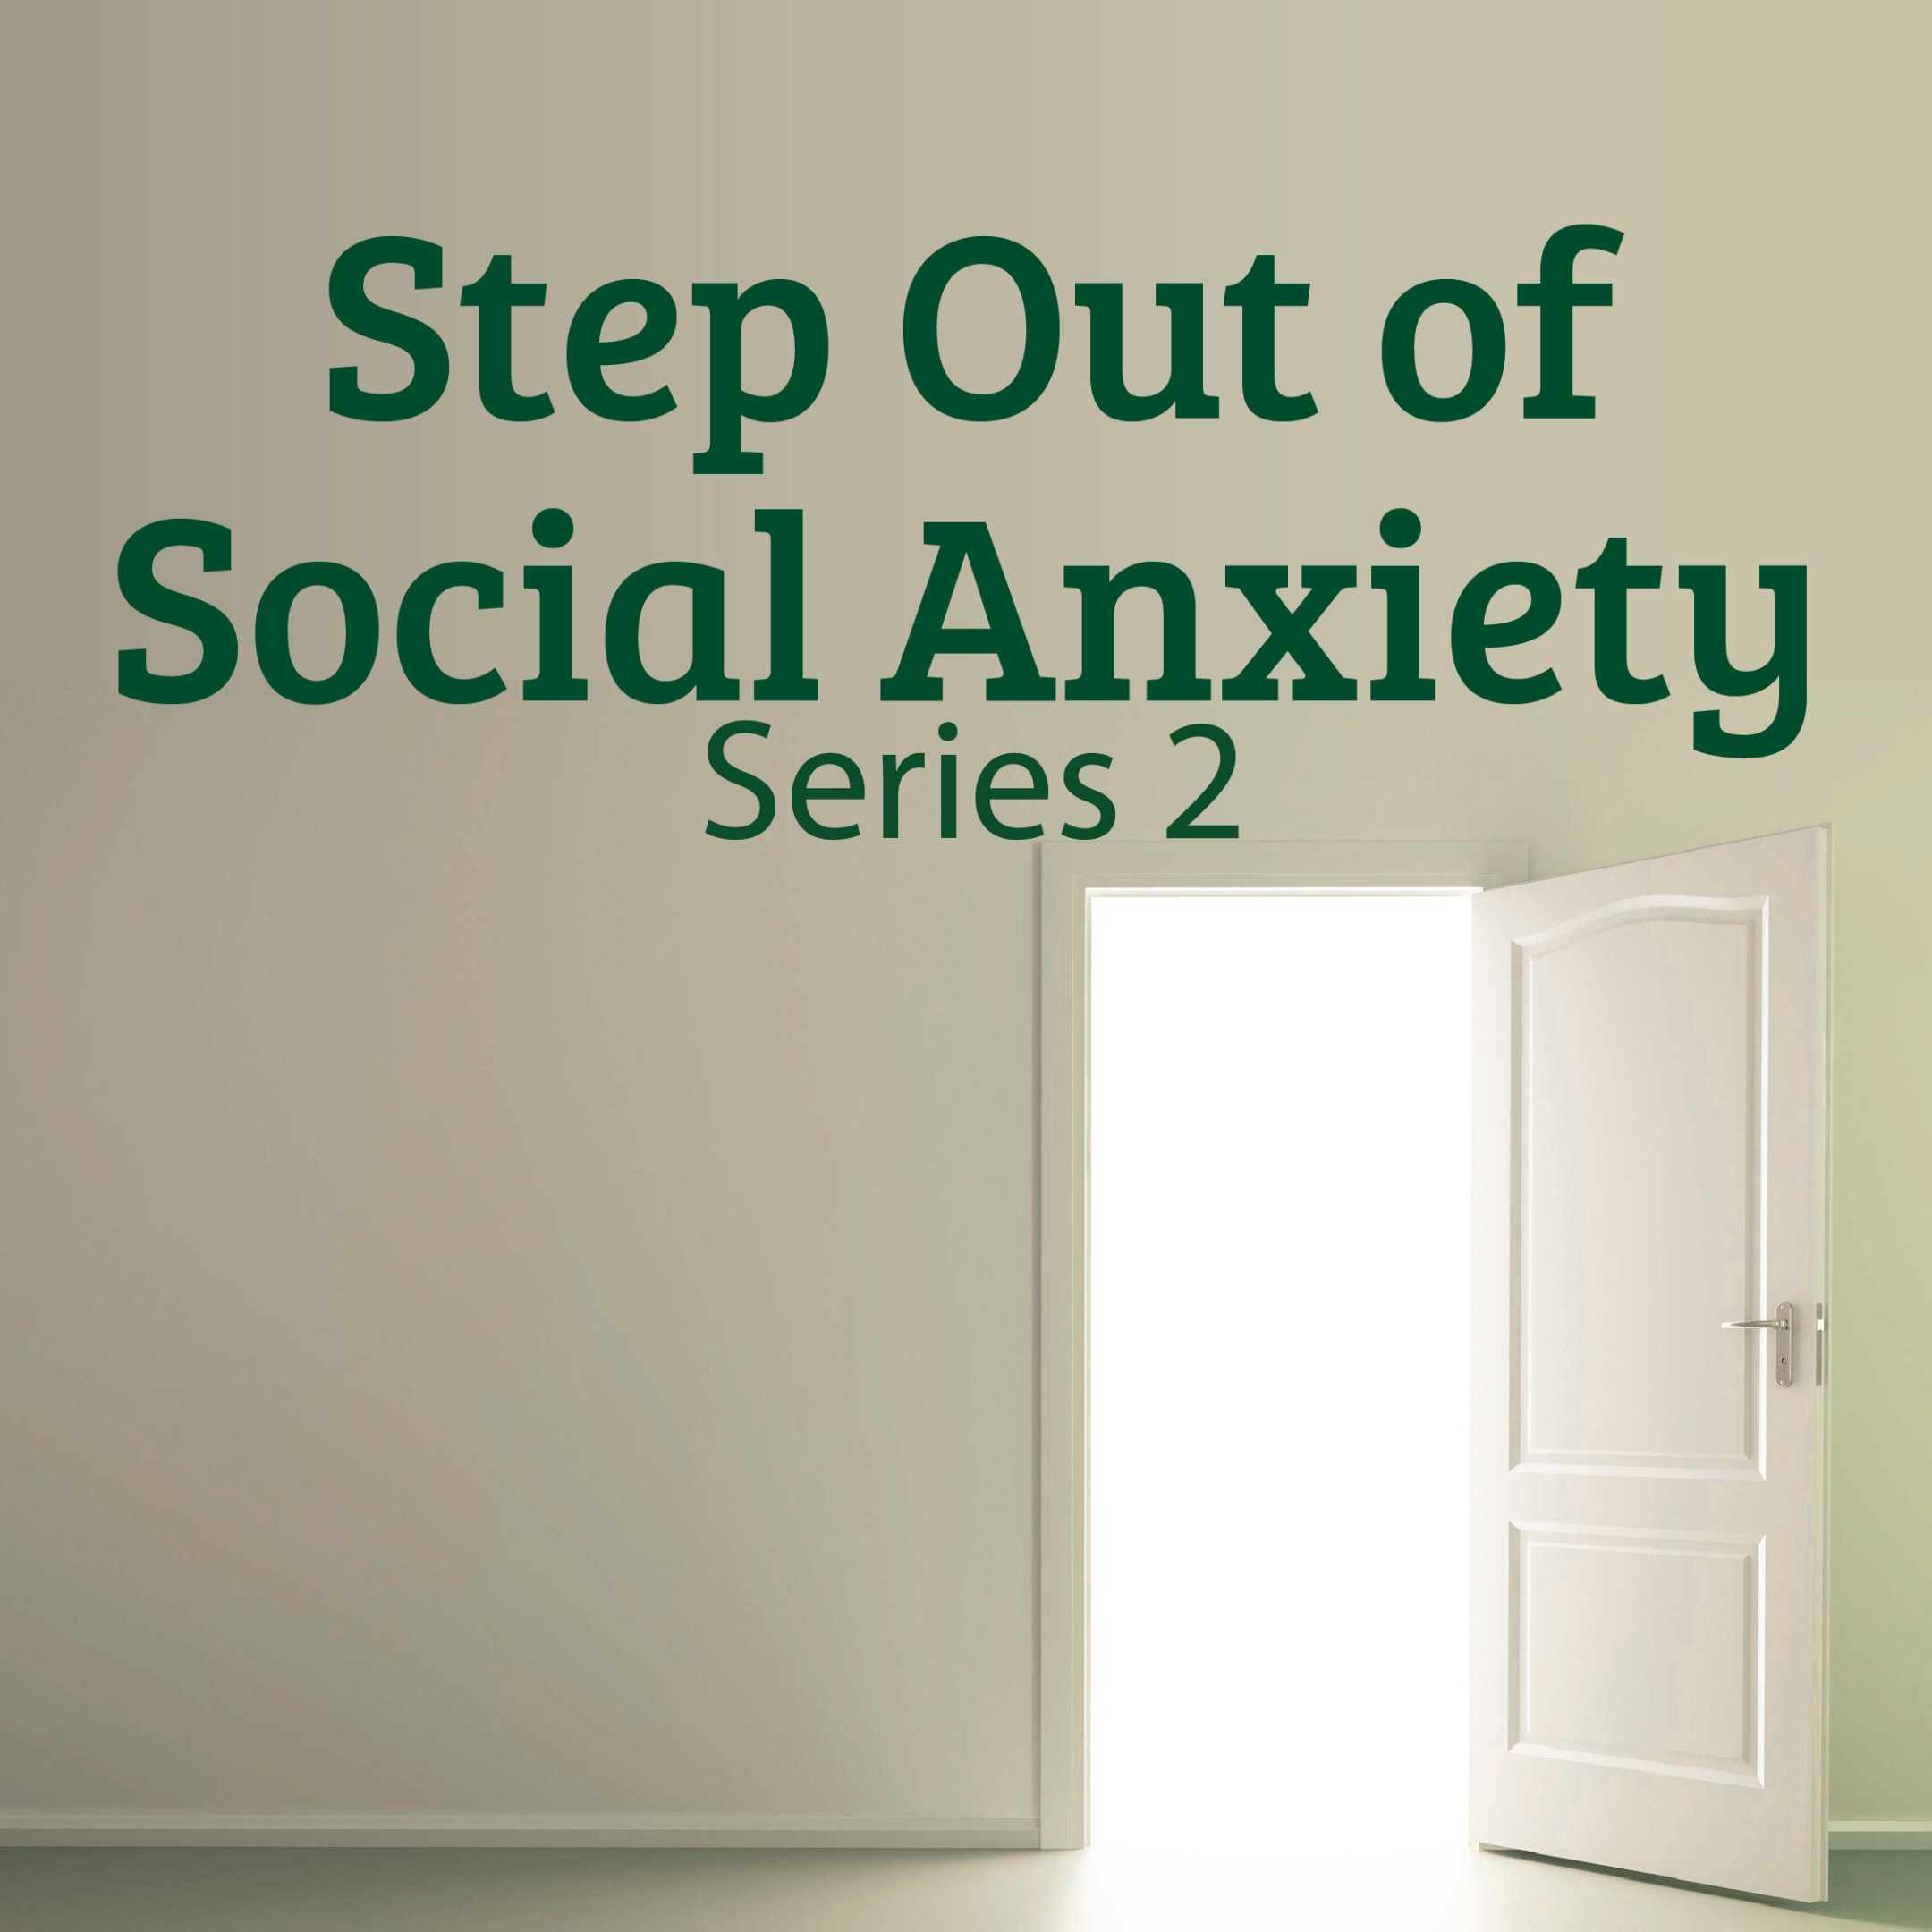 Step Out of Social Anxiety Series 2